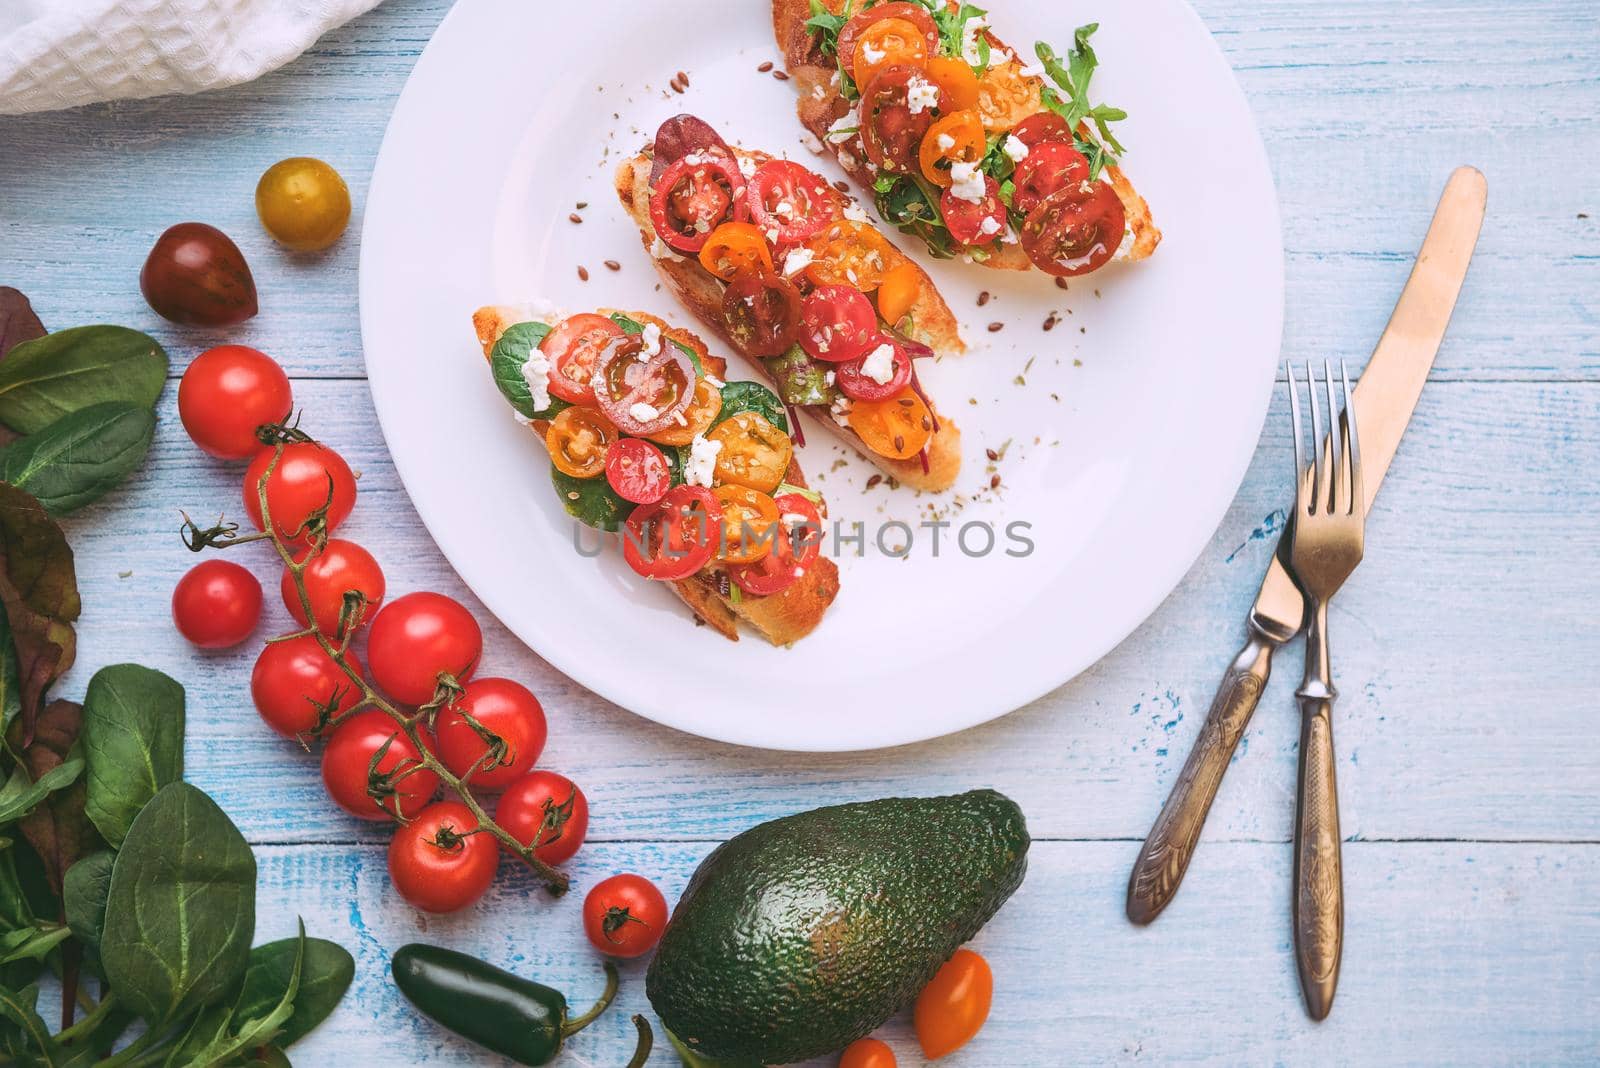 Bruschetta with cheese, basil, arugula and cherry tomatoes by vvmich